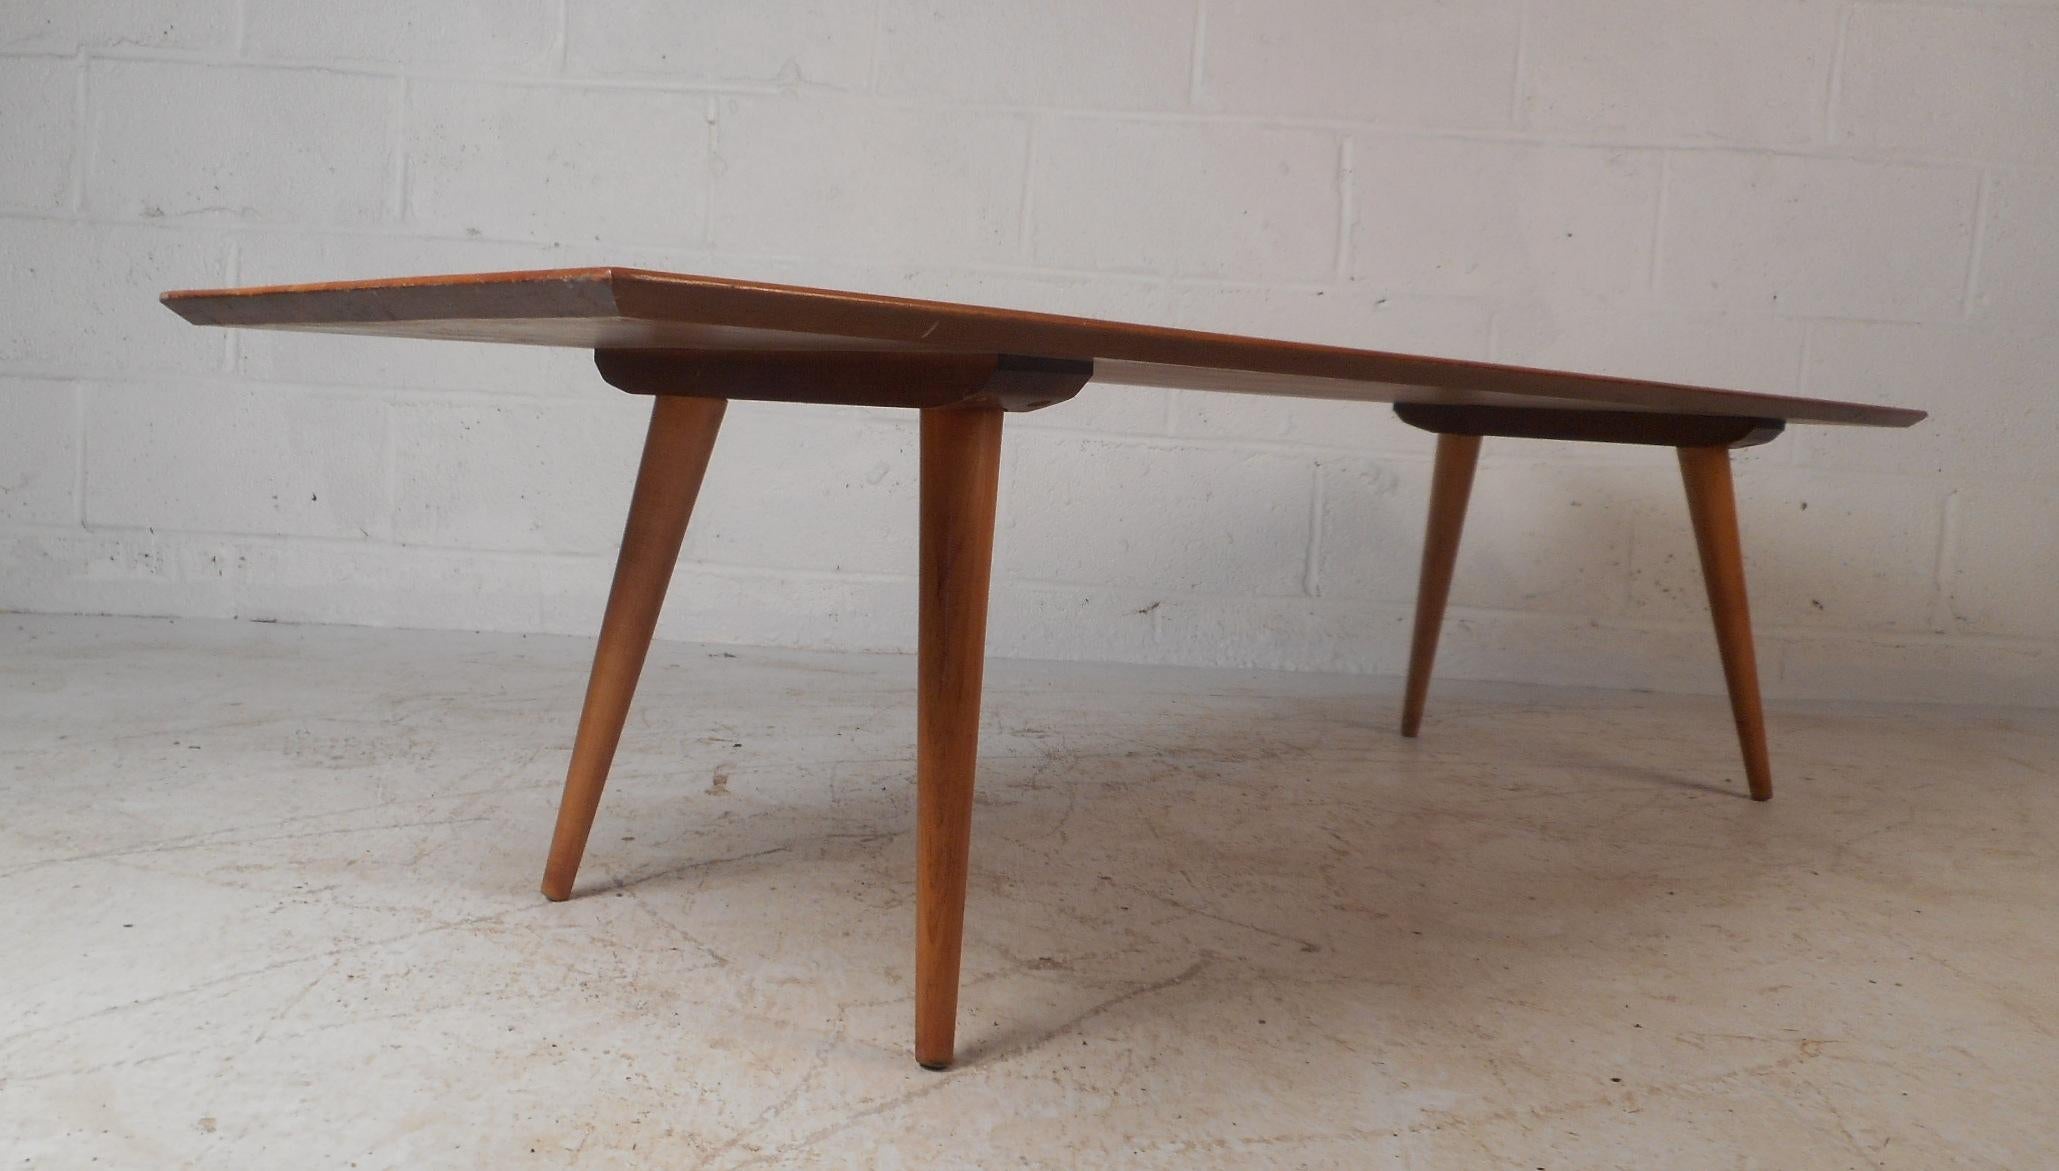 North American Mid-Century Modern Coffee Table by Paul McCobb for Planners Group